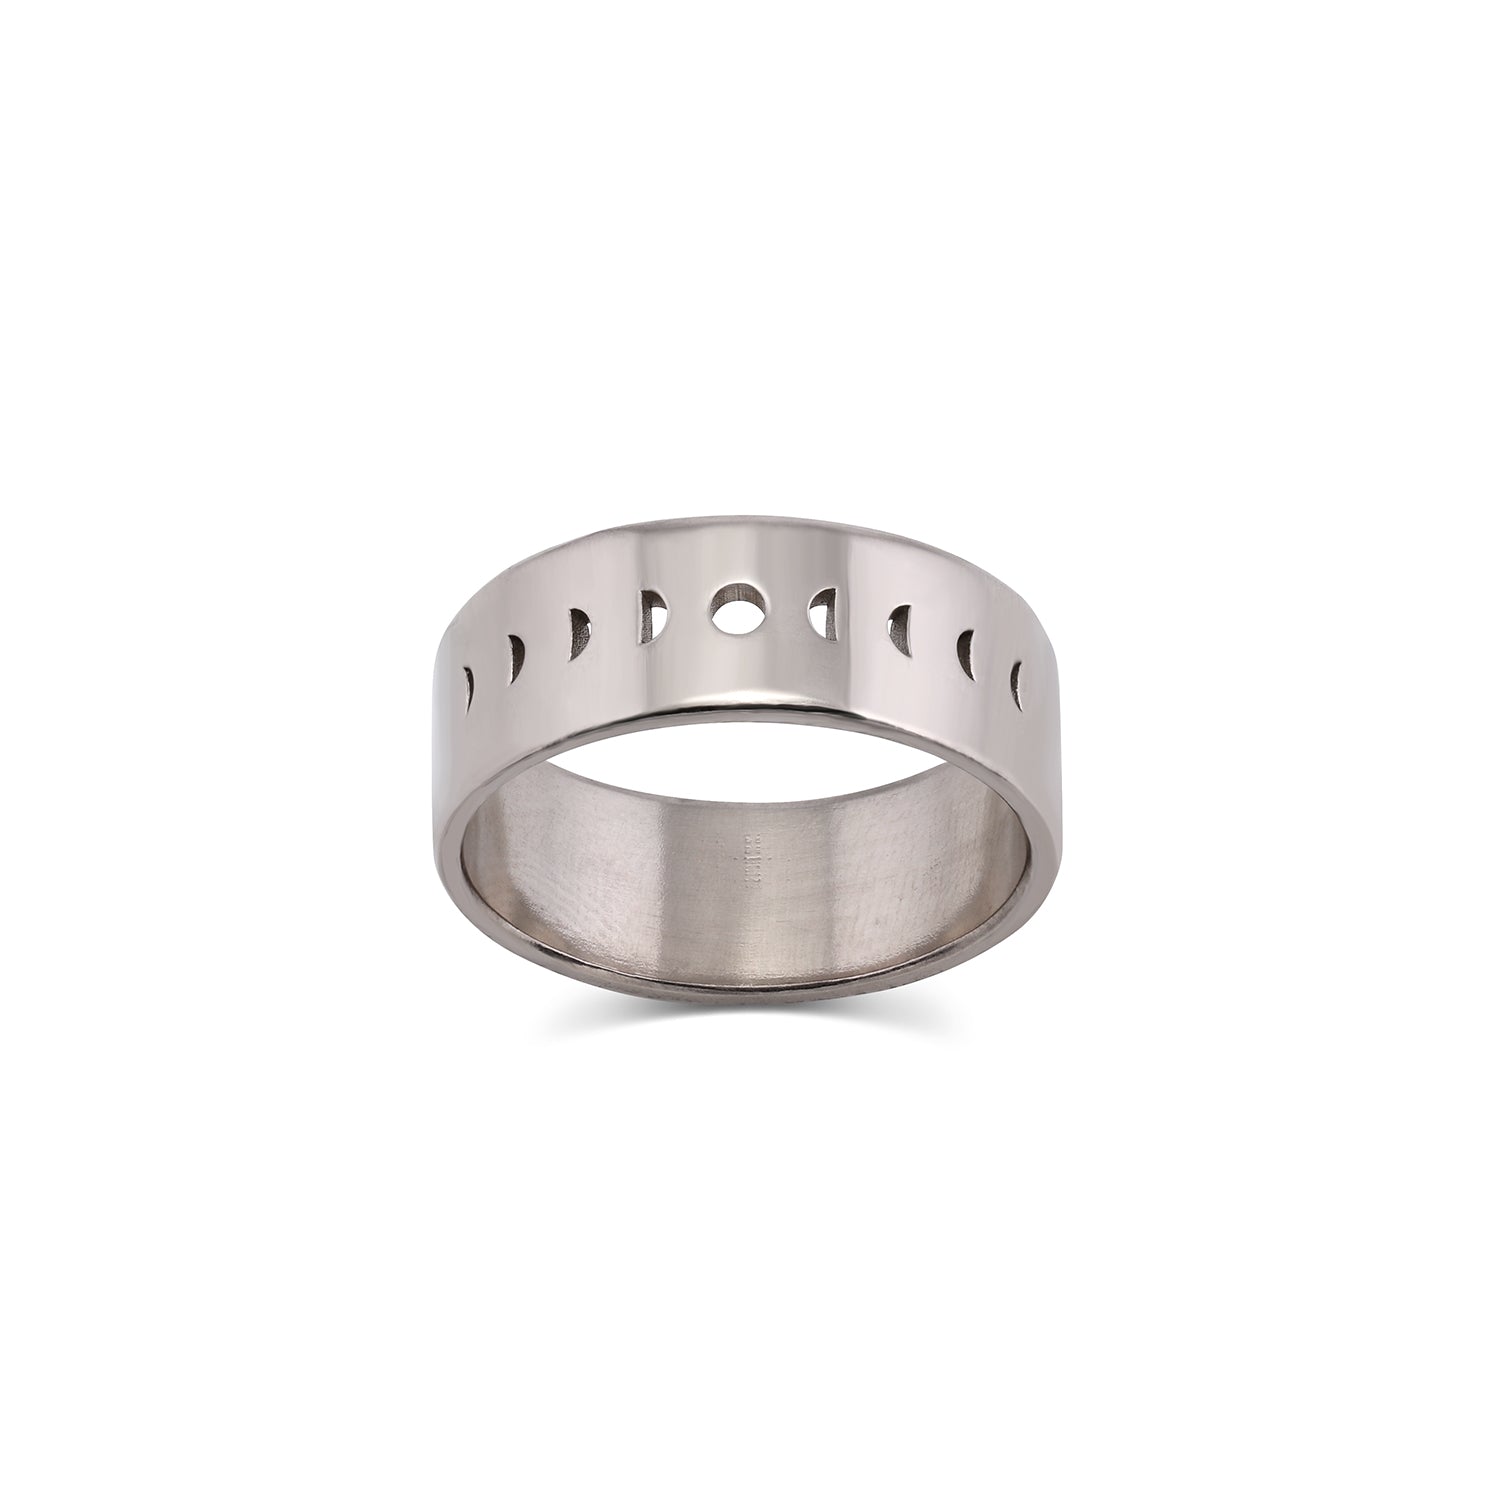 Moon Phase Rings moon phase rings > stacking rings > wedding bands > gender neutral bands > rose cut diamond ring > promise rings >lunar phase ring > moon ring > phases of the moon ring Eclipse Moon phase ring | gender neutral wide band | 18k palladium